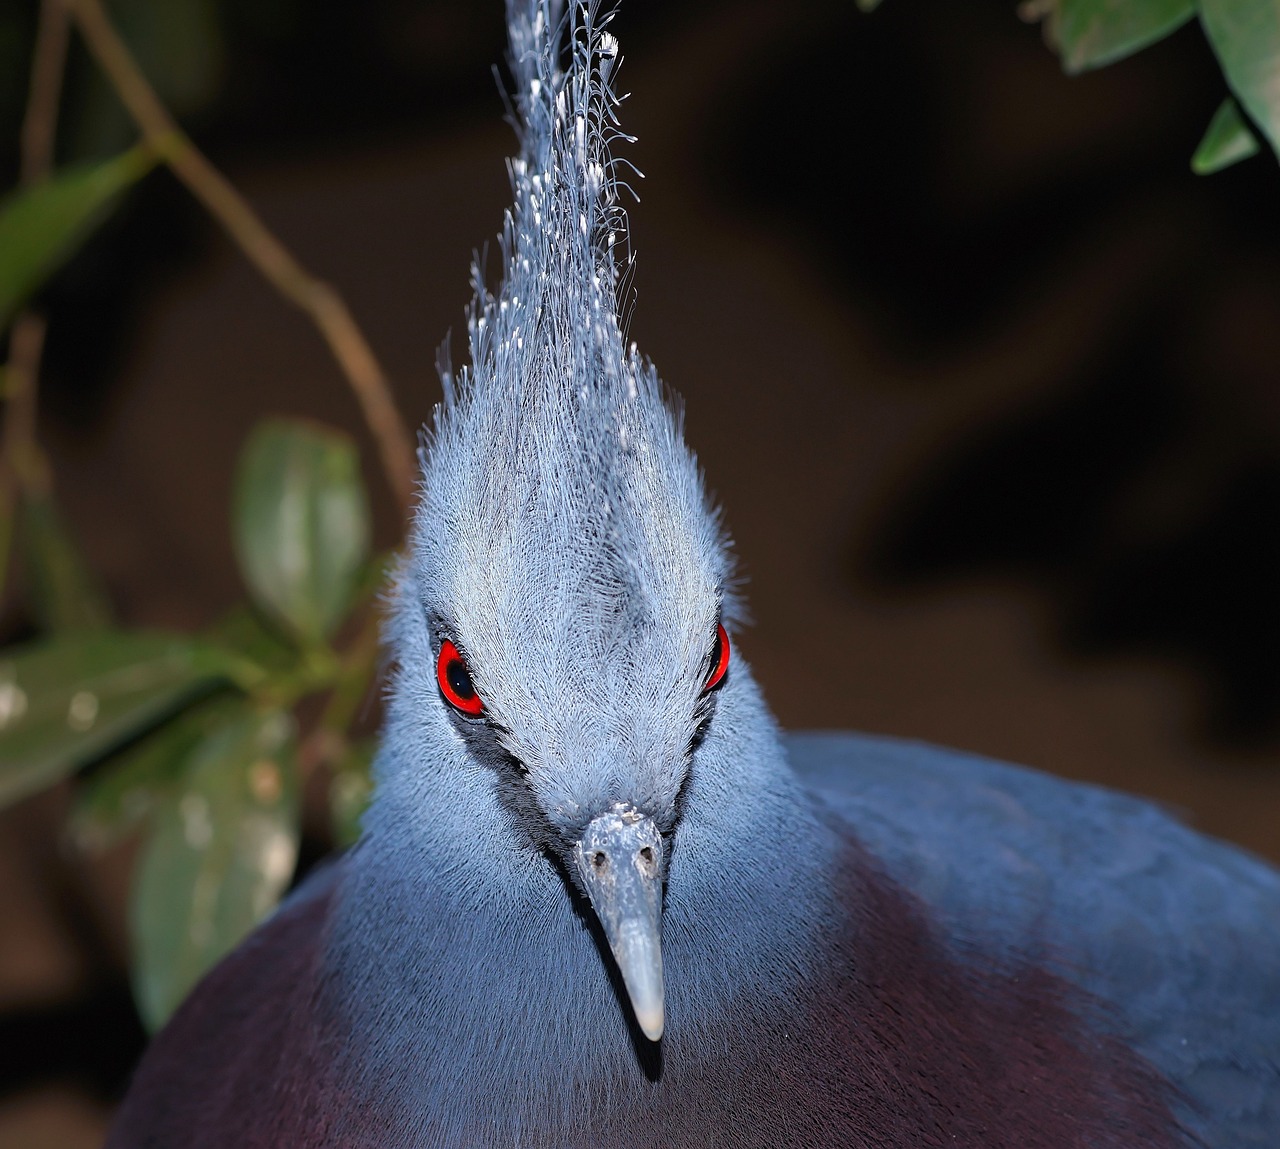 a close up of a bird with red eyes, a portrait, hurufiyya, blue mohawk, diadem on the head, purple. smooth shank, istock